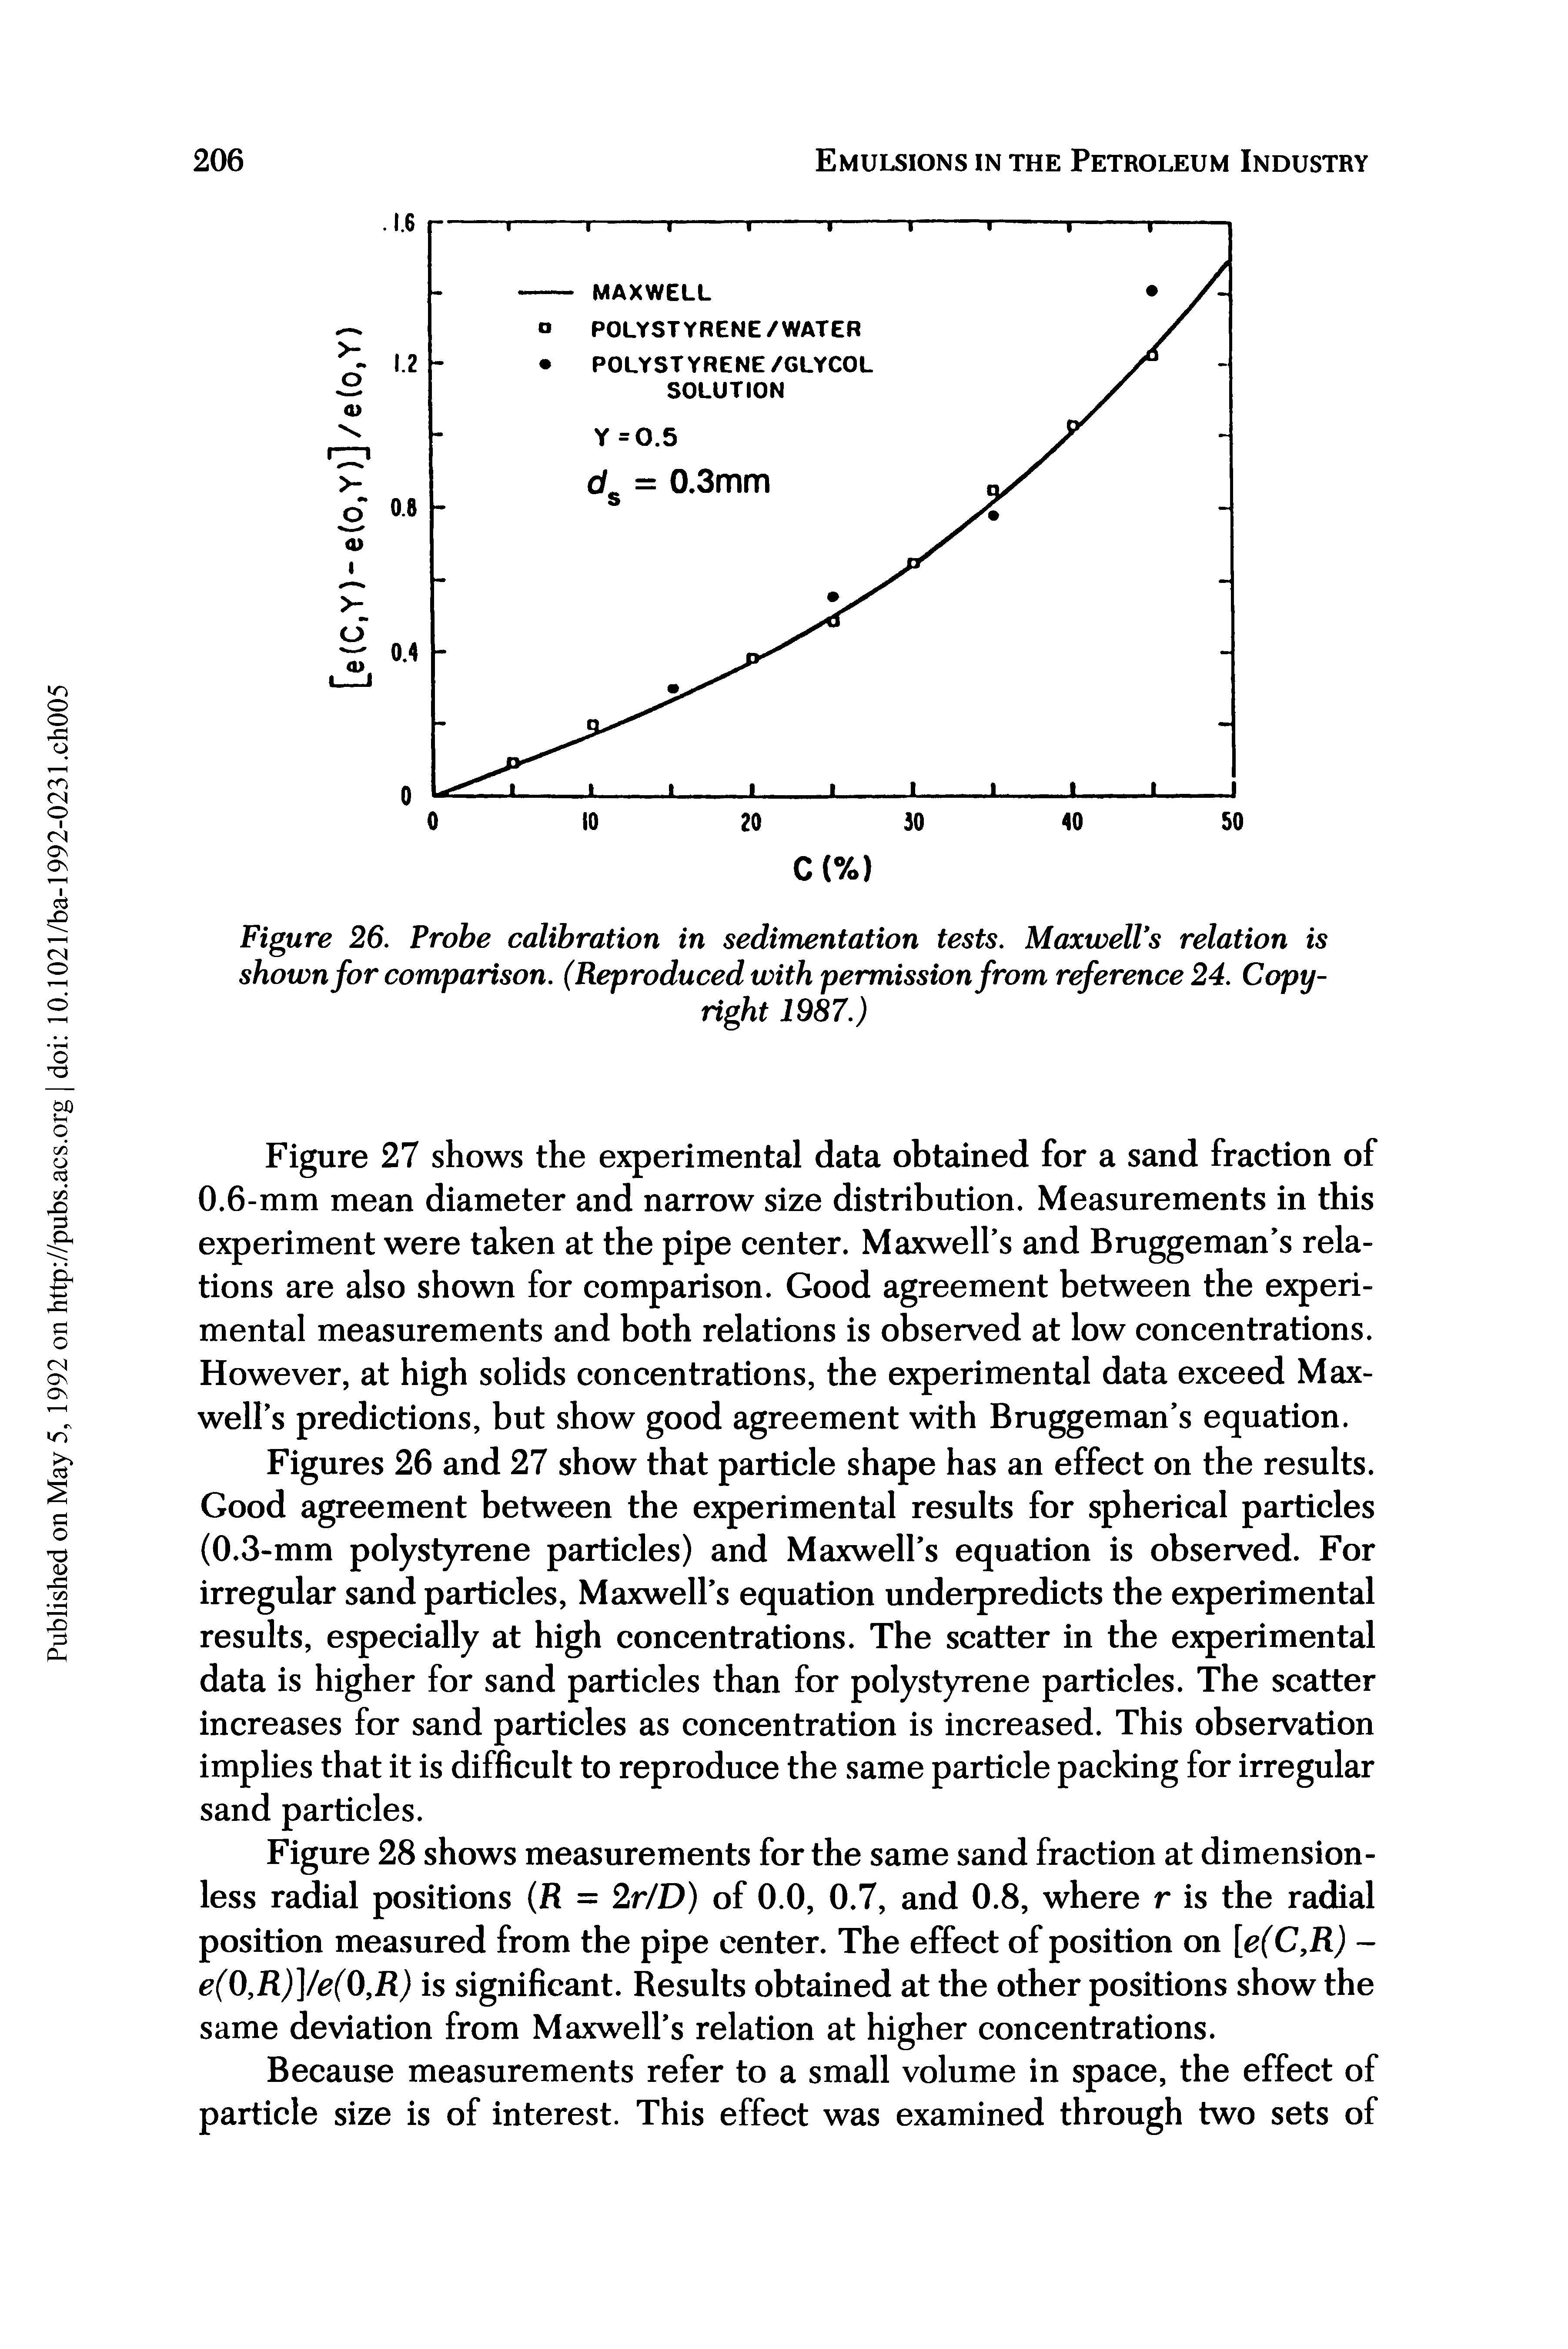 Figure 26. Probe calibration in sedimentation tests. Maxwells relation is shown for comparison. (Reproduced with permission from reference 24. Copyright 1987.)...